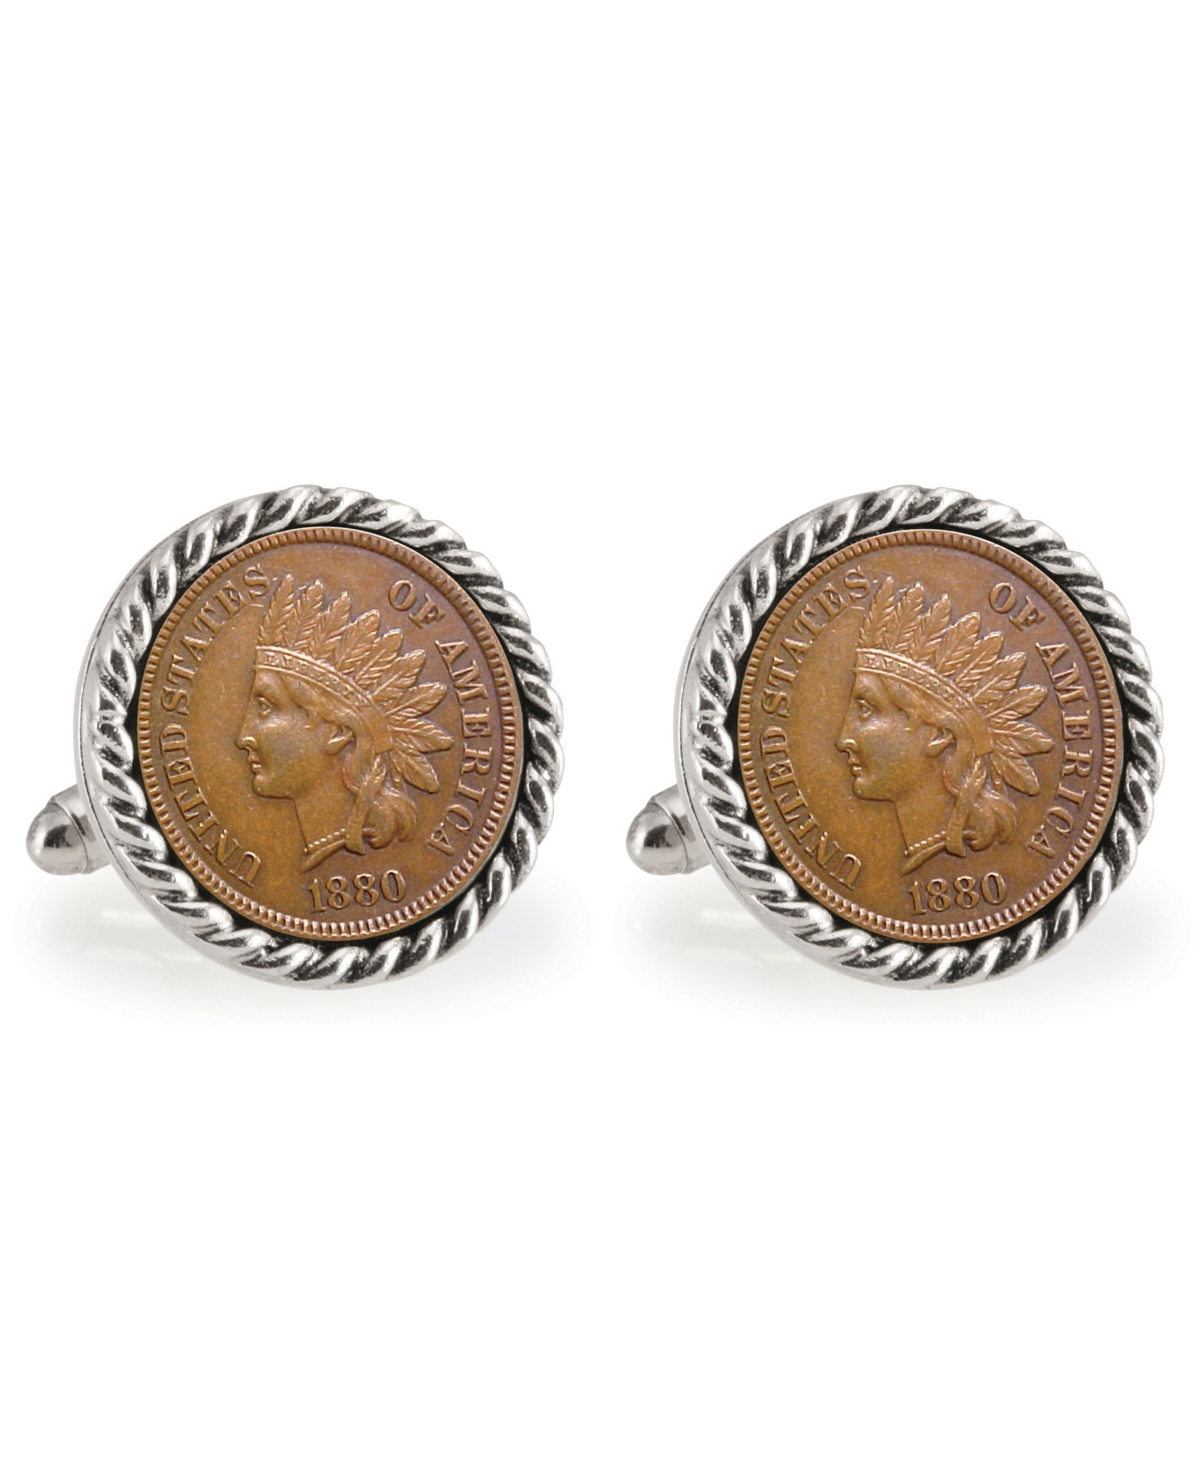 American Coin Treasures Usc 1880 Rope Bezel Penny Coin Cuff Links